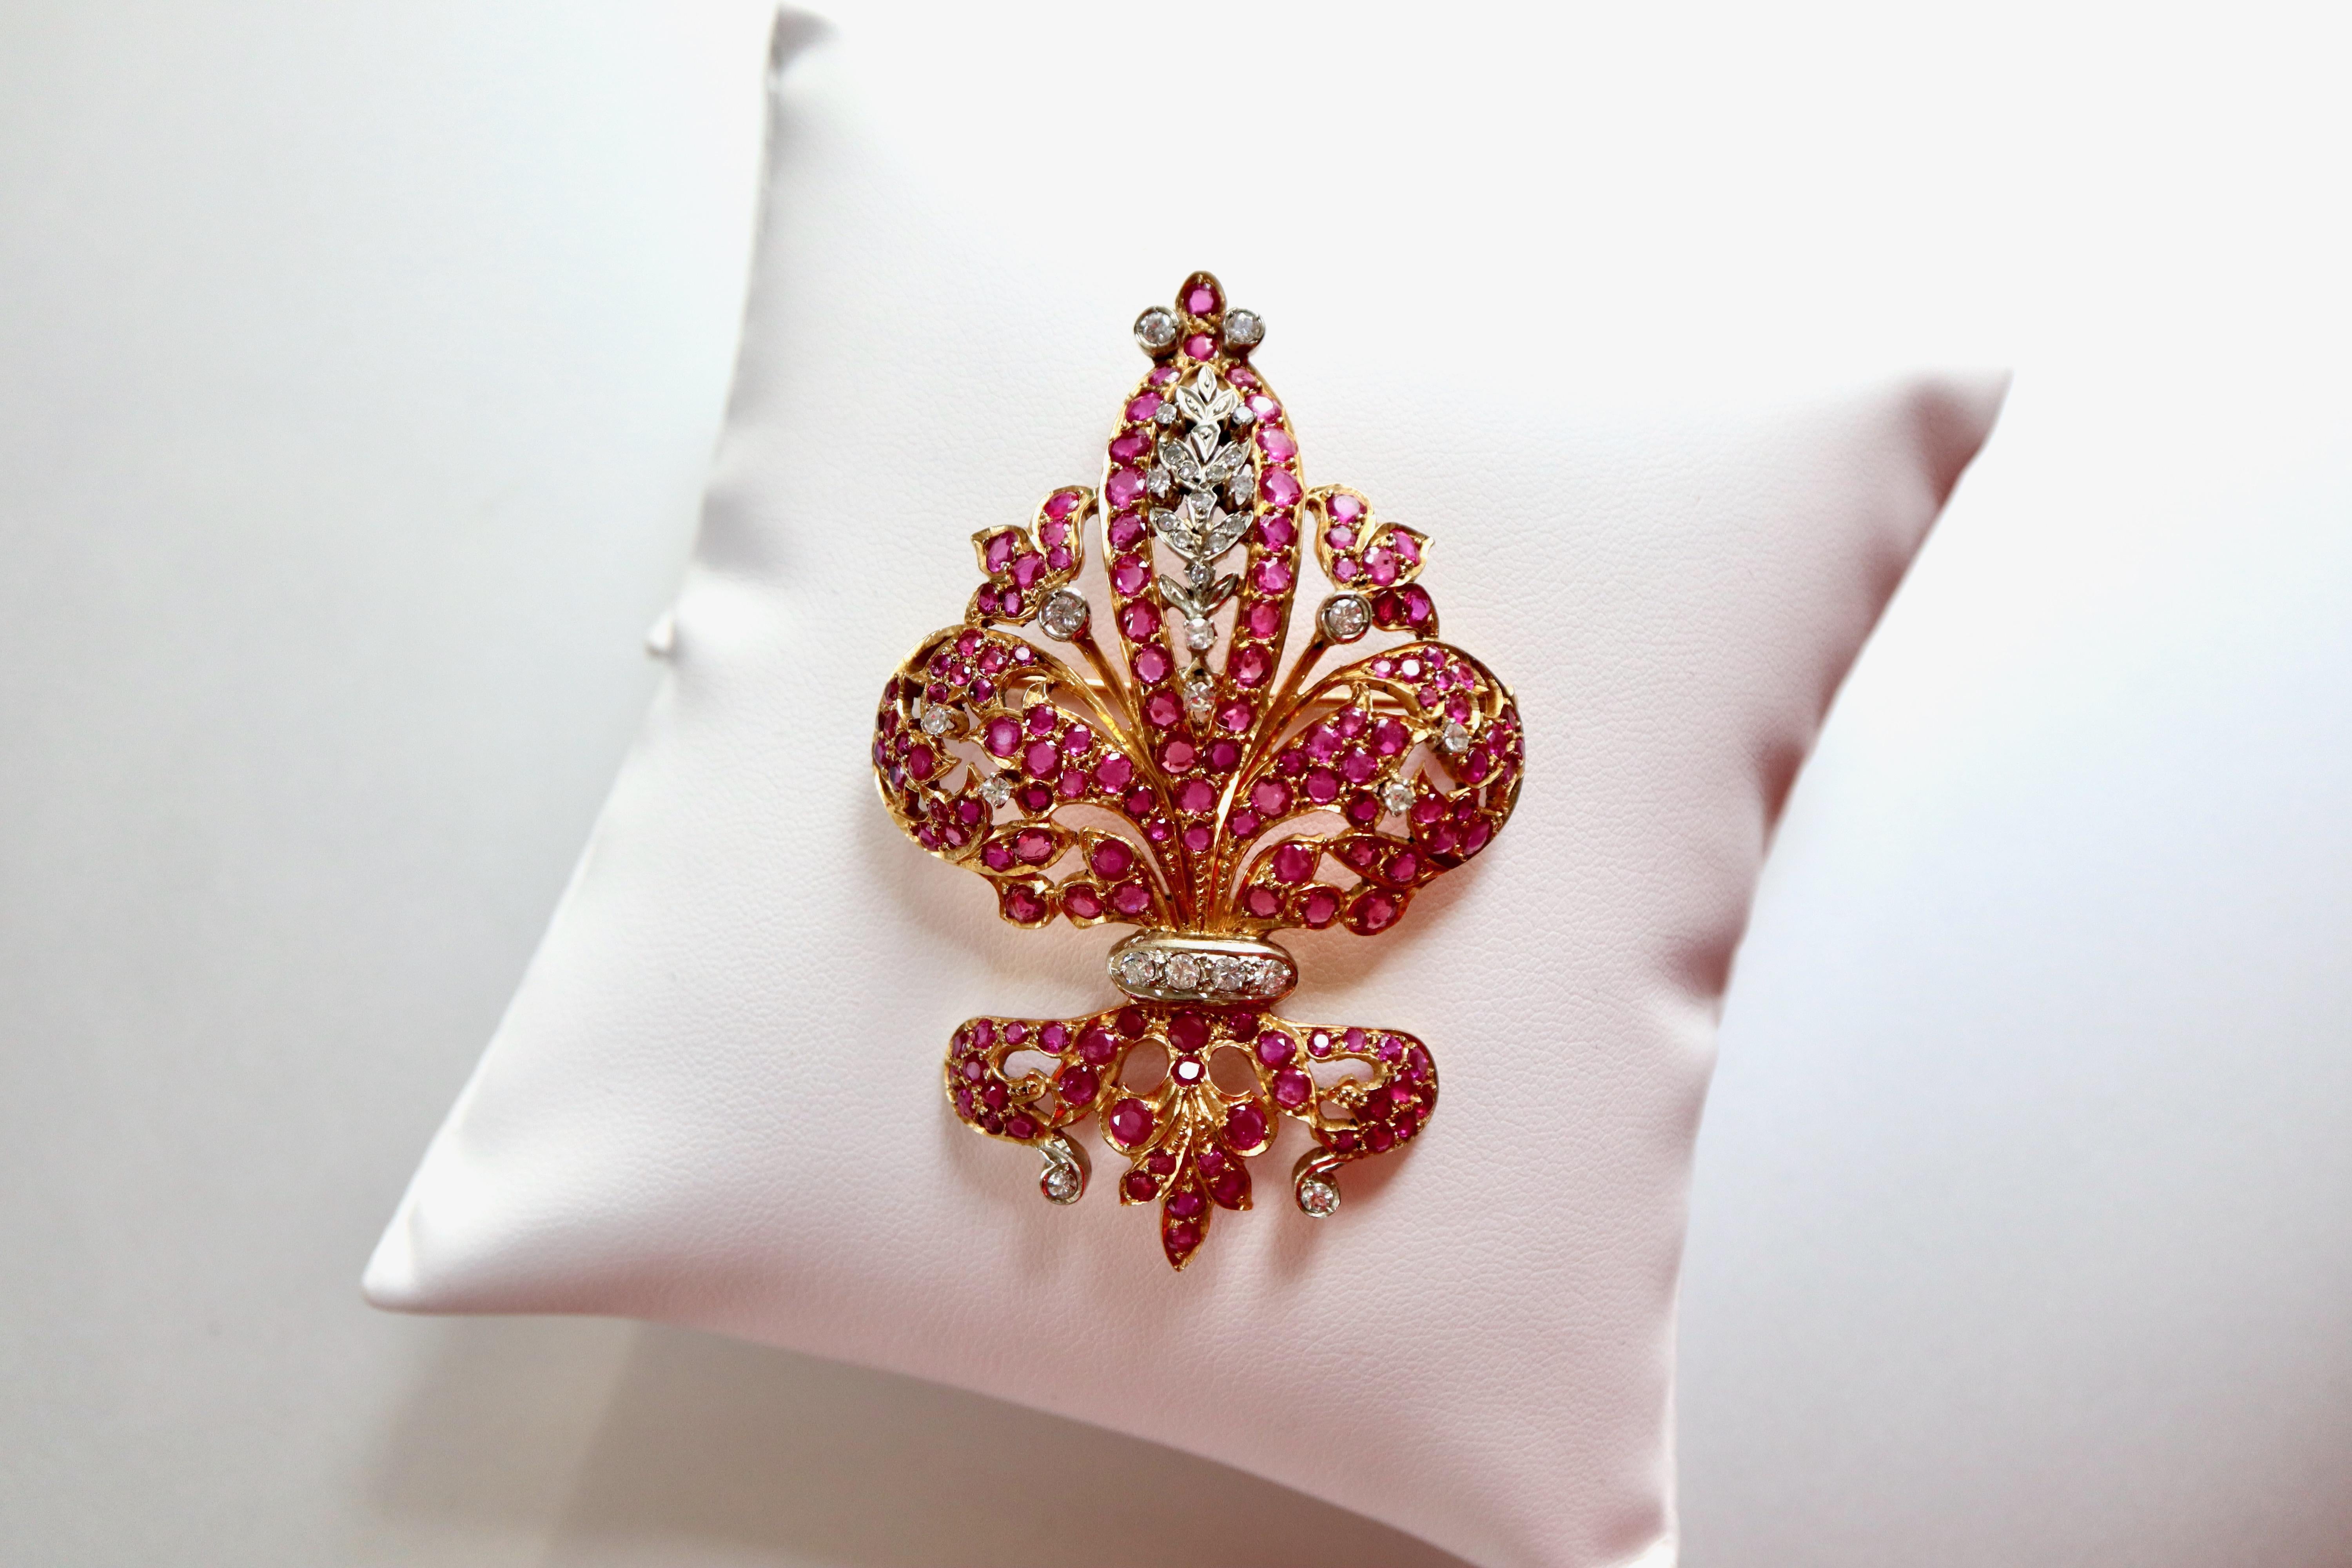 Brooch Heraldic Lily in 18 Kt Gold, Rubies Diamonds For Sale 2